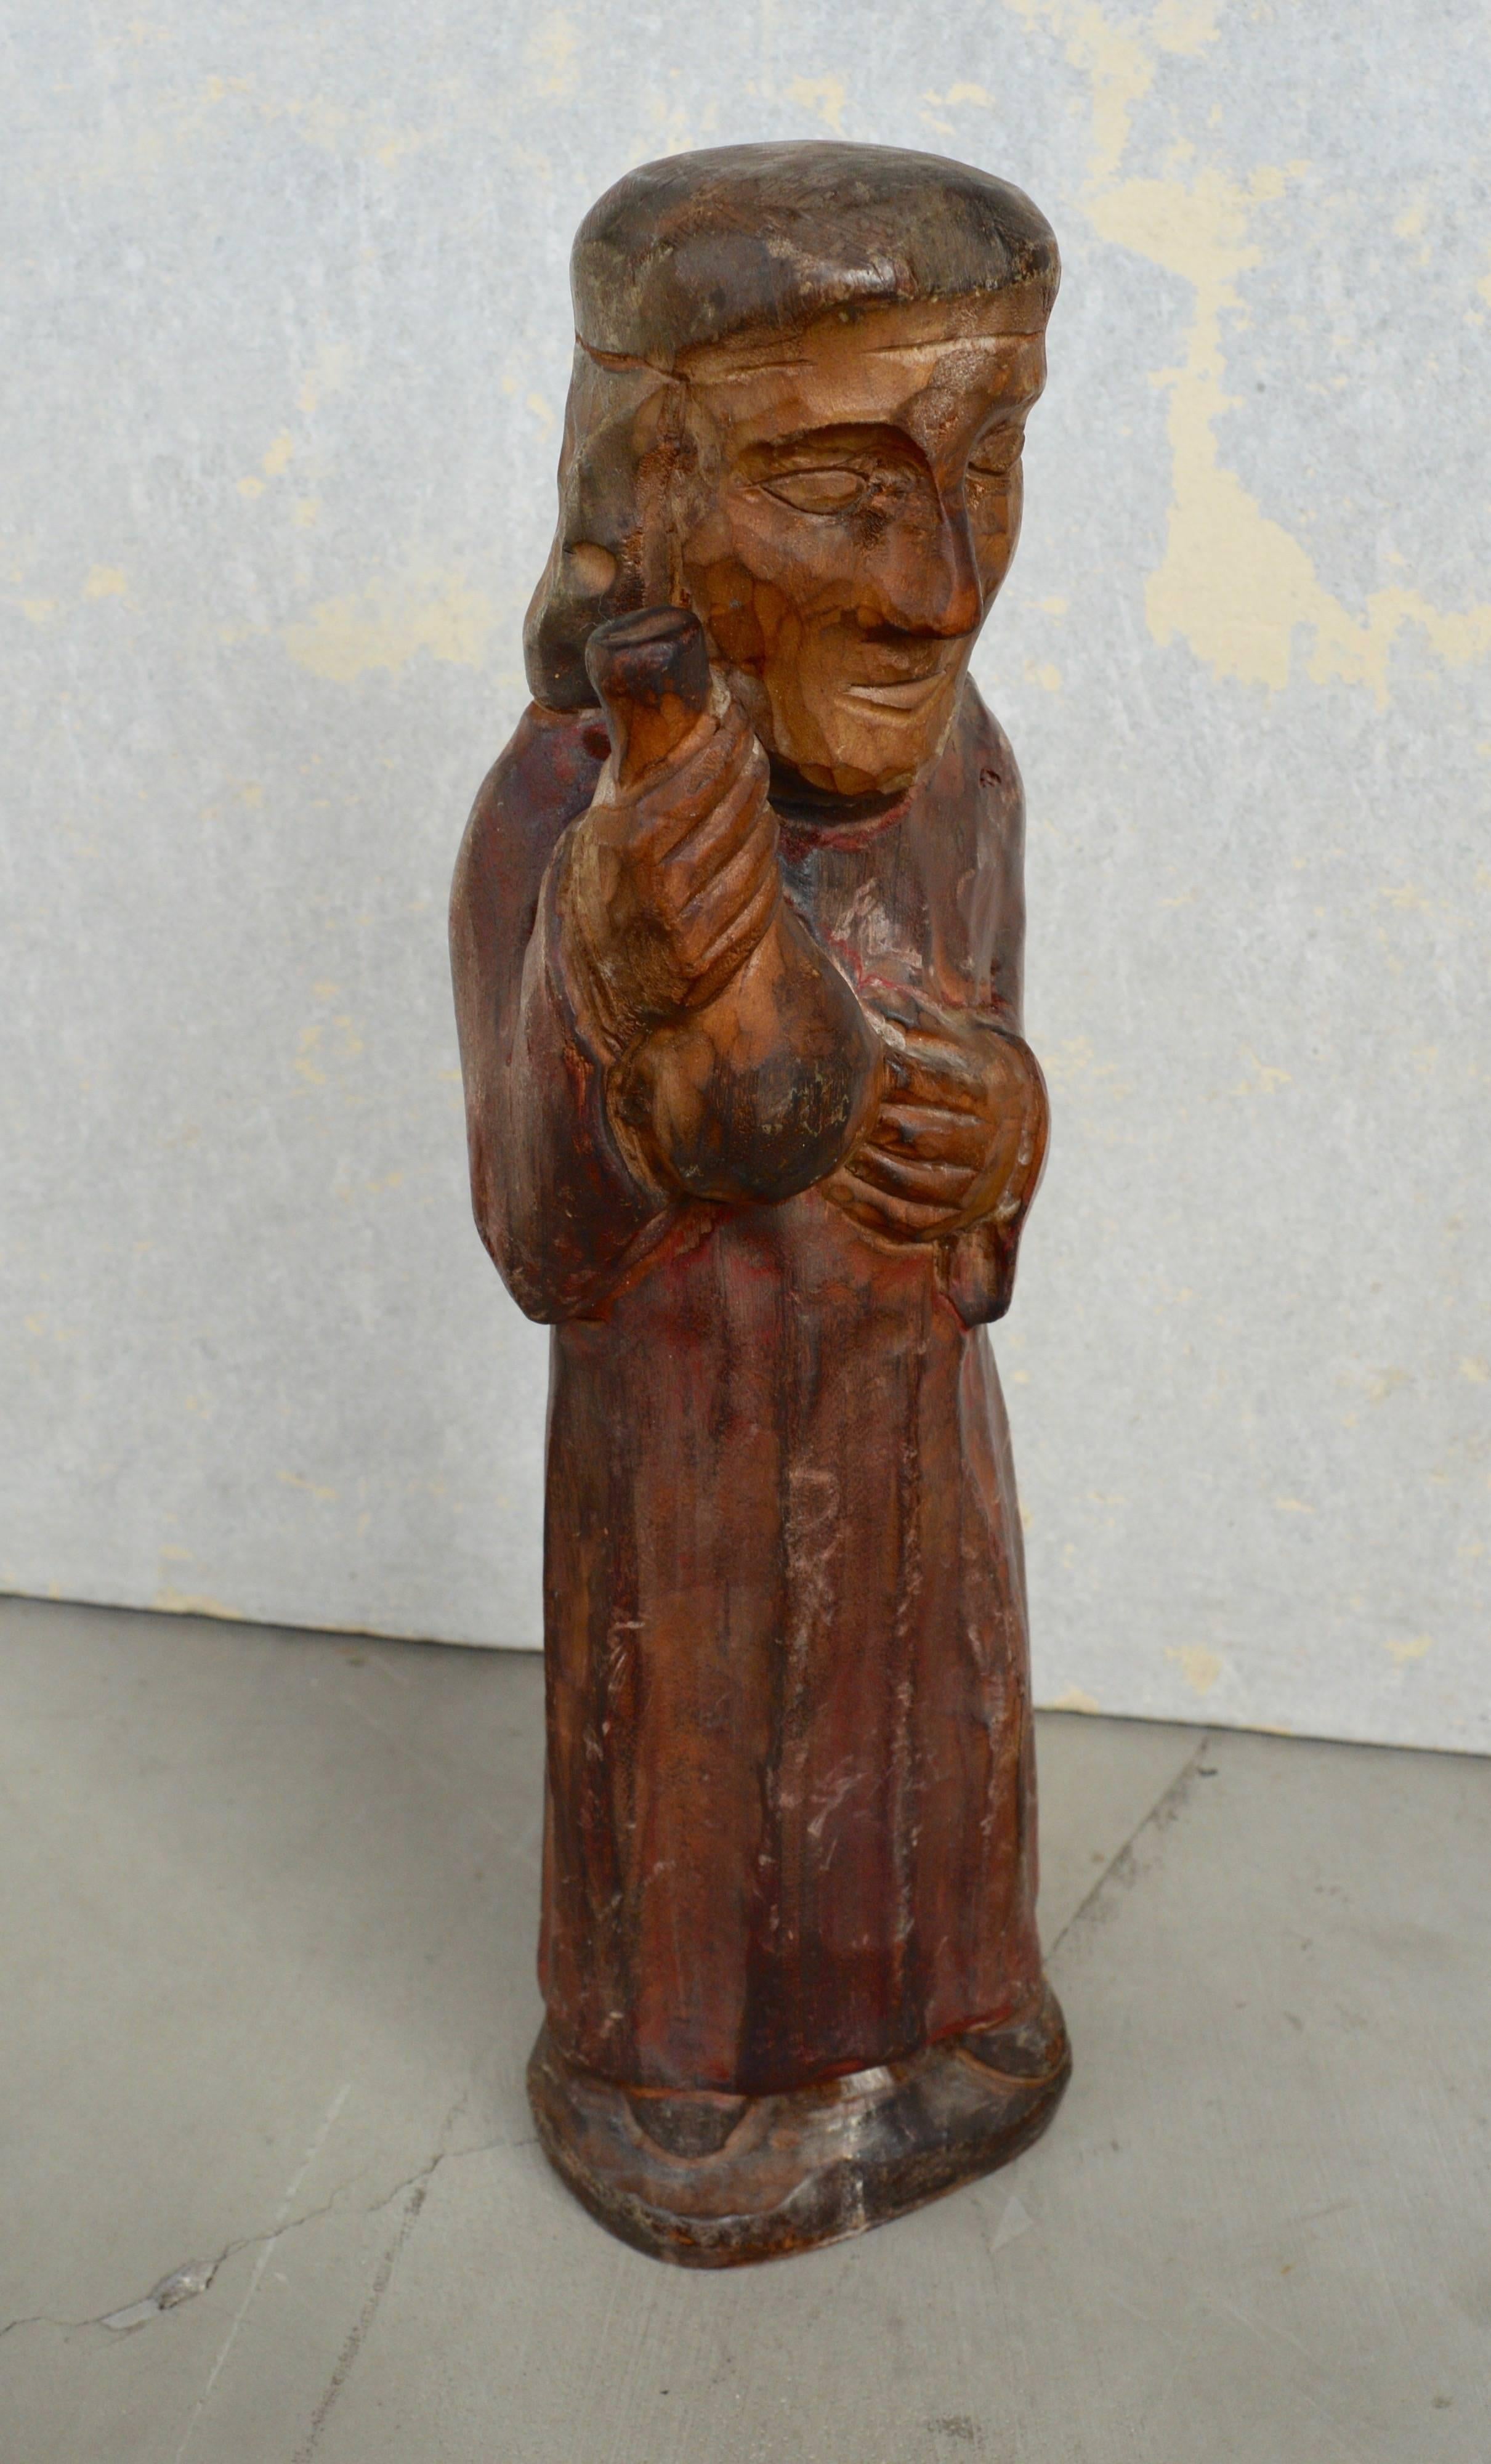 Fantastic hand-painted wood Santo. Hand-carved and hand painted. Great coloring. Excellent condition.